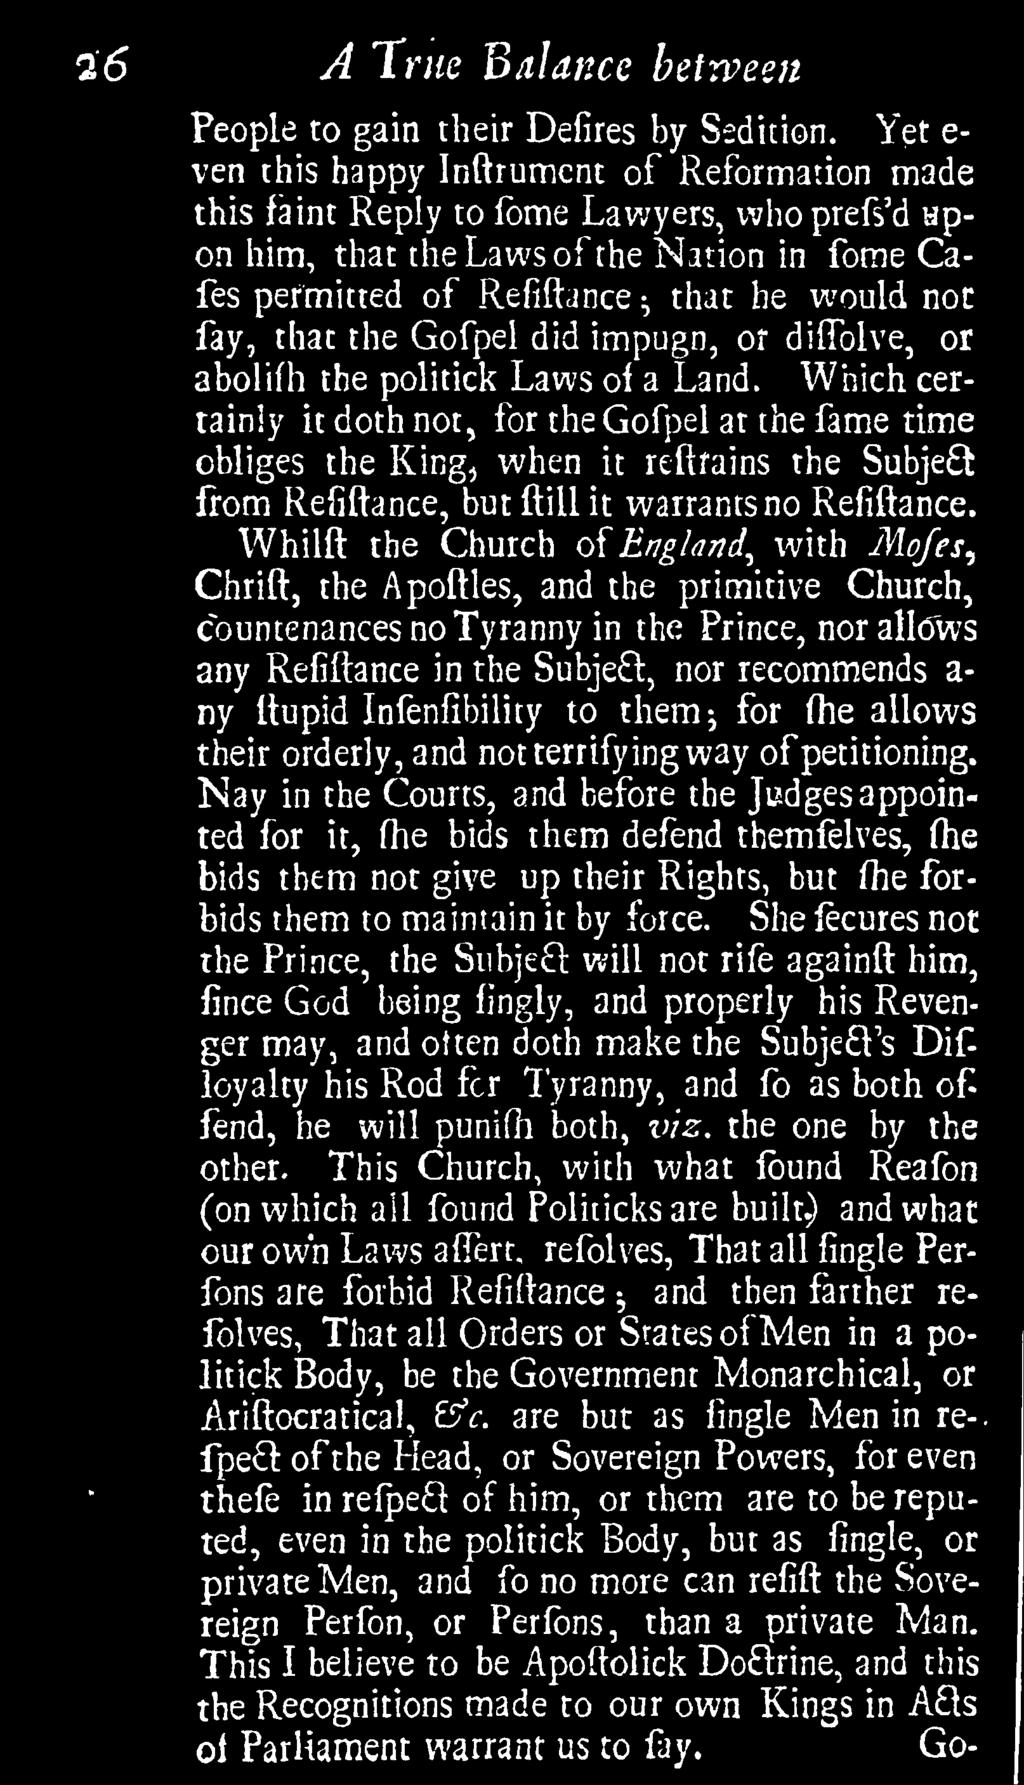 Whilft the Church o{ England^ with Mofes^ Chrift, the Apolfles, and the primitive Church, countenances no Tyranny in the Prince, nor allows any Refiftance in the Subjeft, nor recommends a- ny ttupid